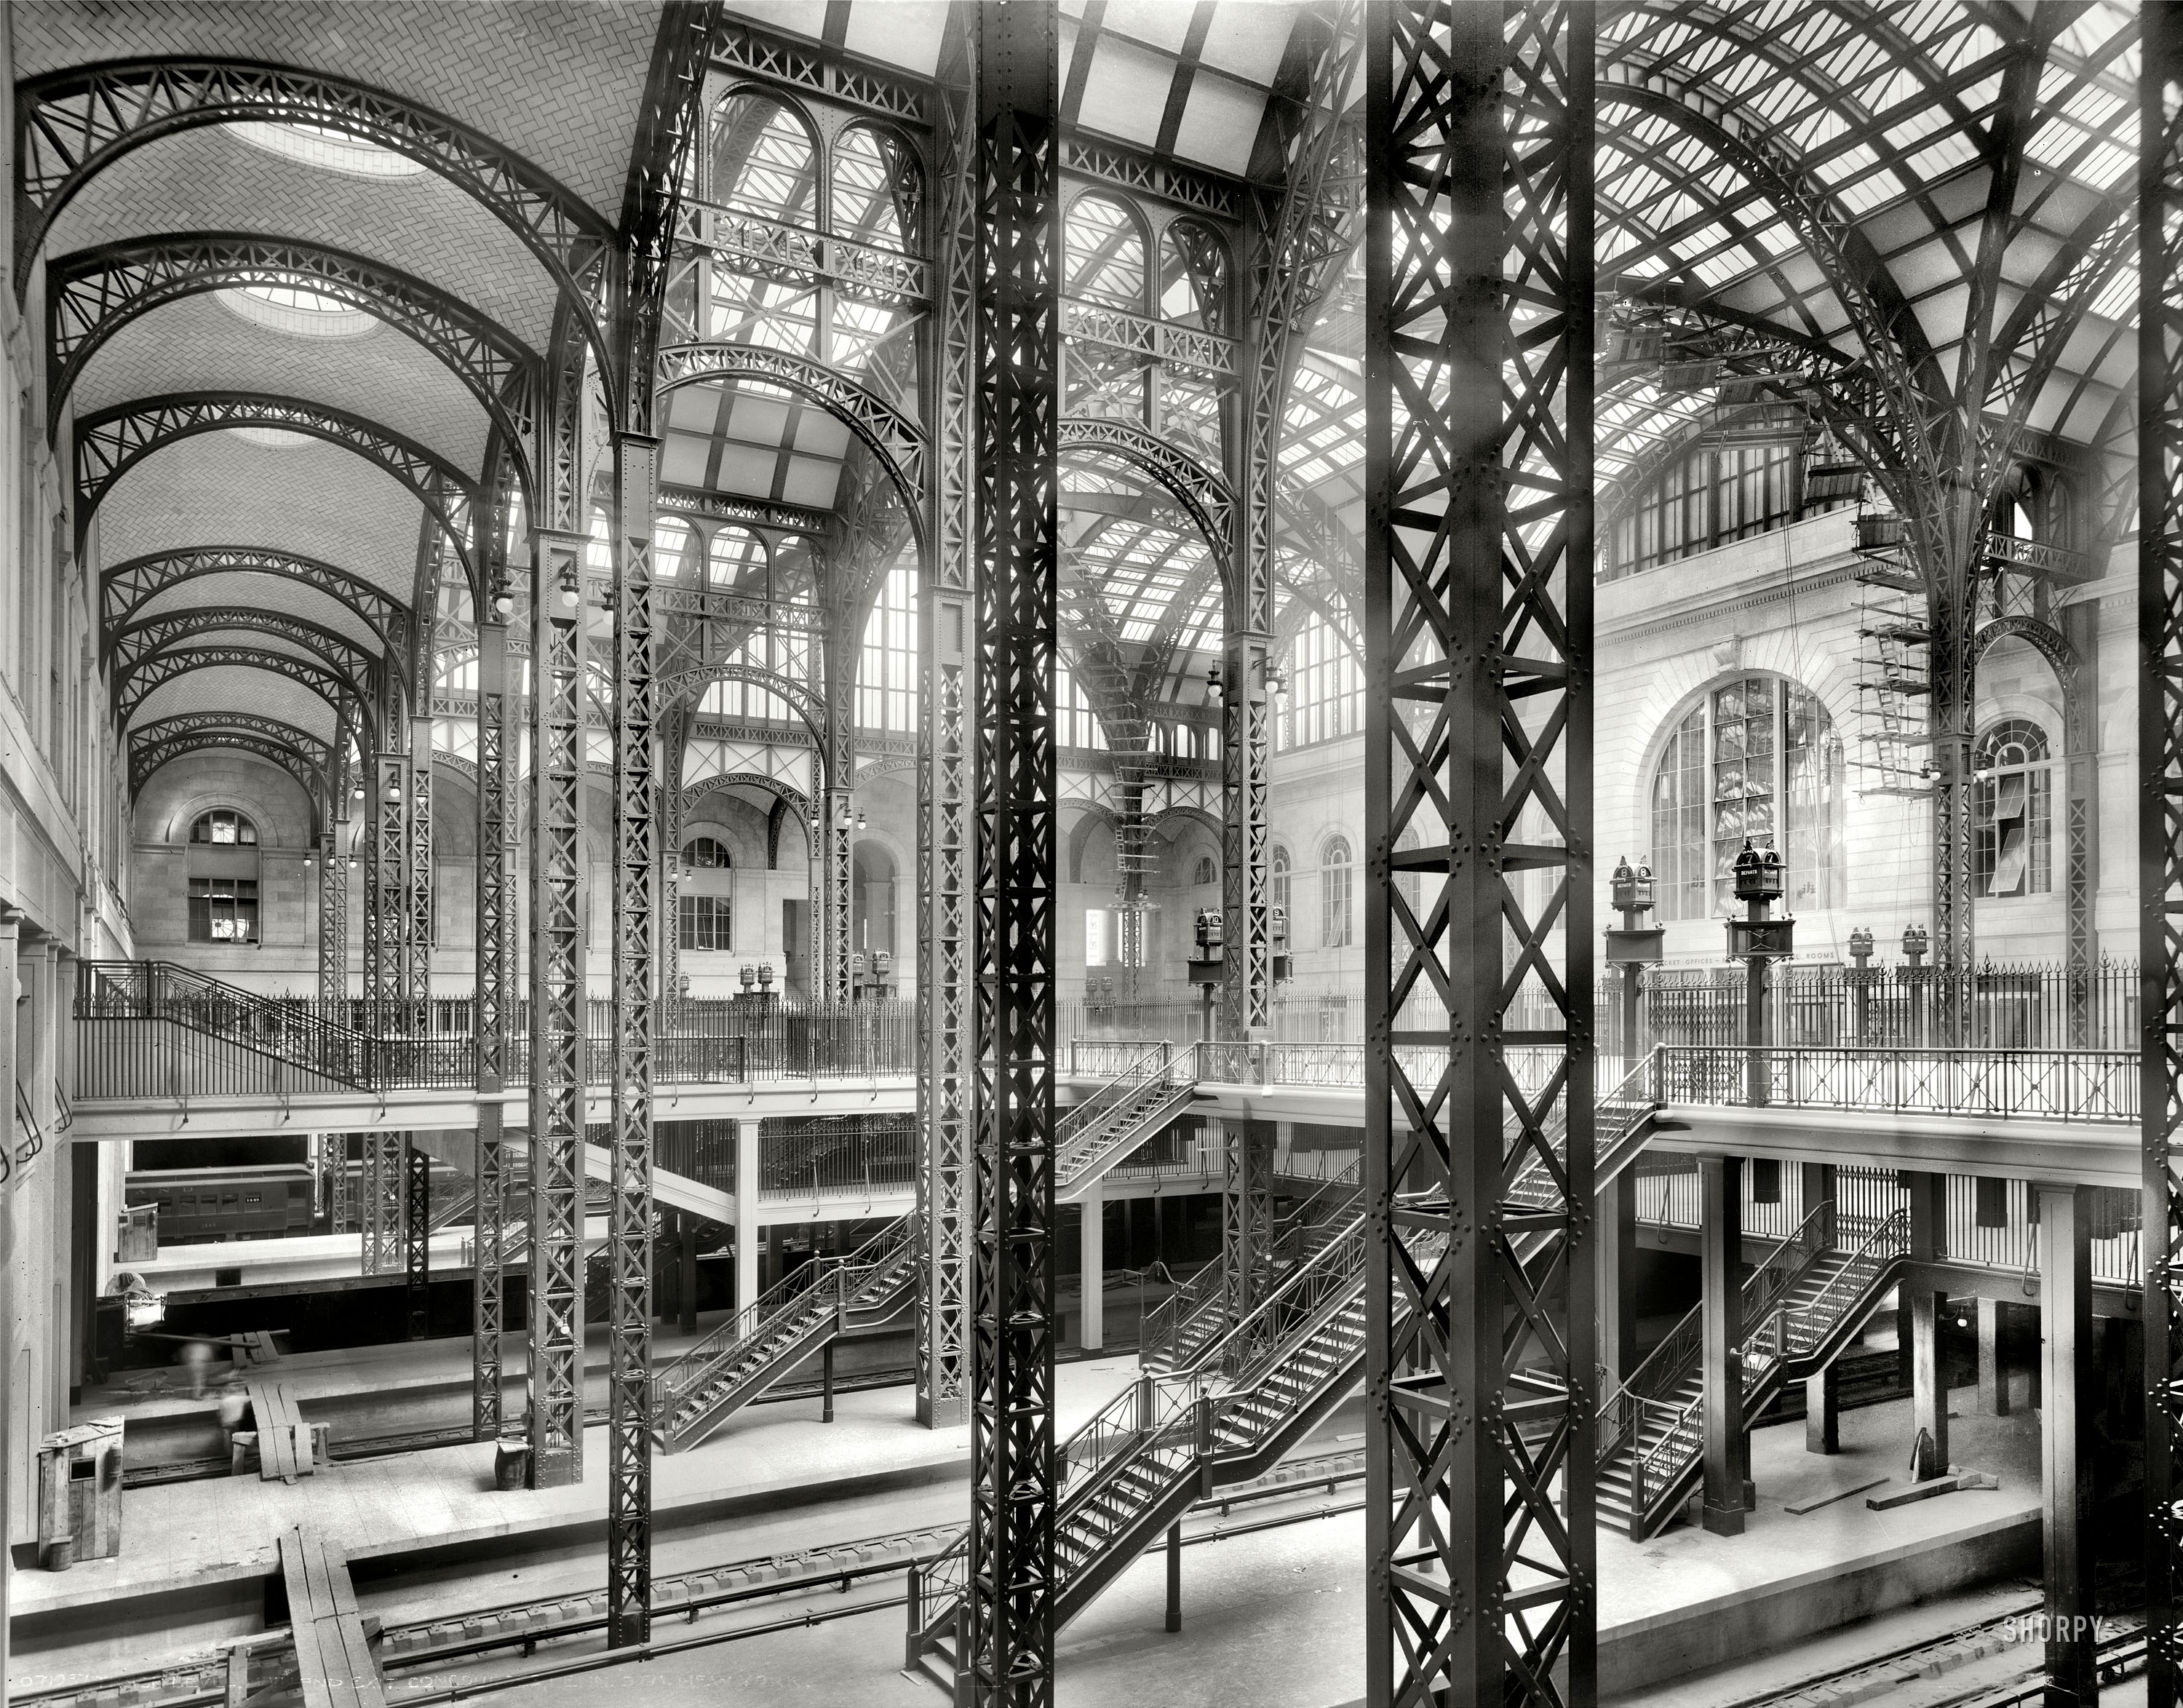 New York circa 1910. "Track level, main and exits, concourses, Pennsylvania Station." 8x10 dry plate glass negative, Detroit Publishing Co. View full size.